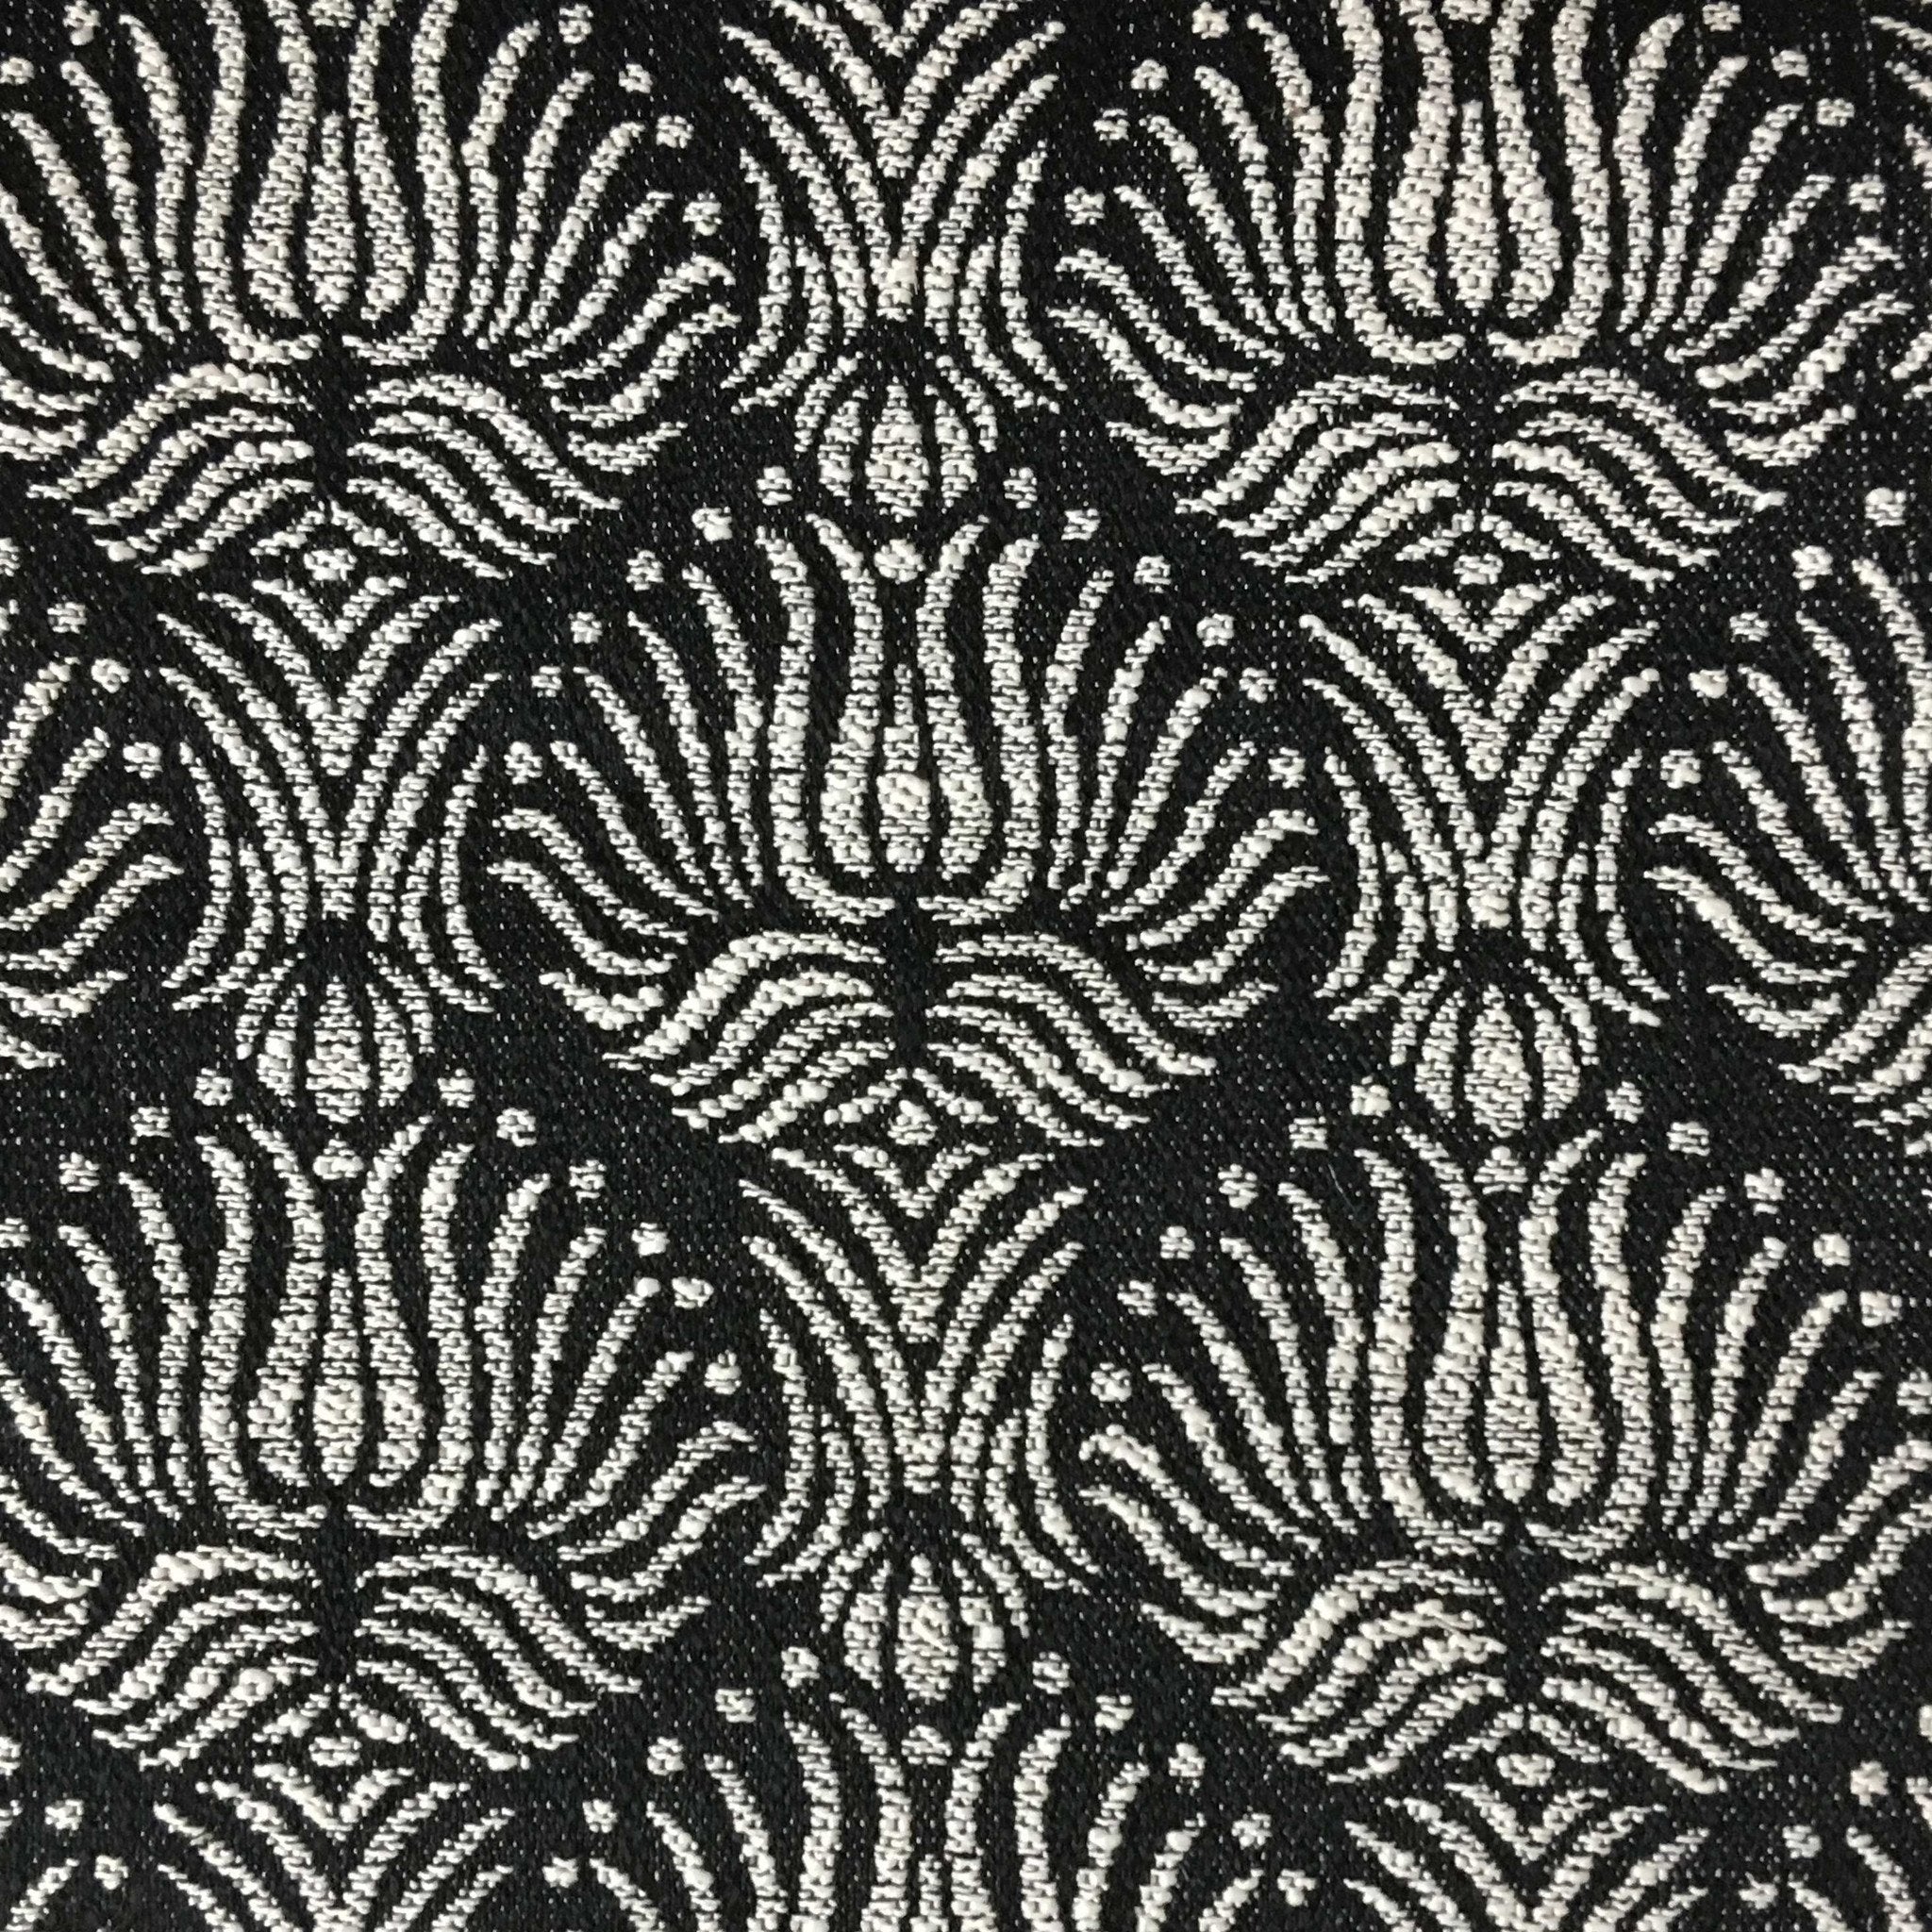 GRAMERCY - DESIGNER PATTERN JACQUARD WOVEN UPHOLSTERY FABRIC BY THE YARD